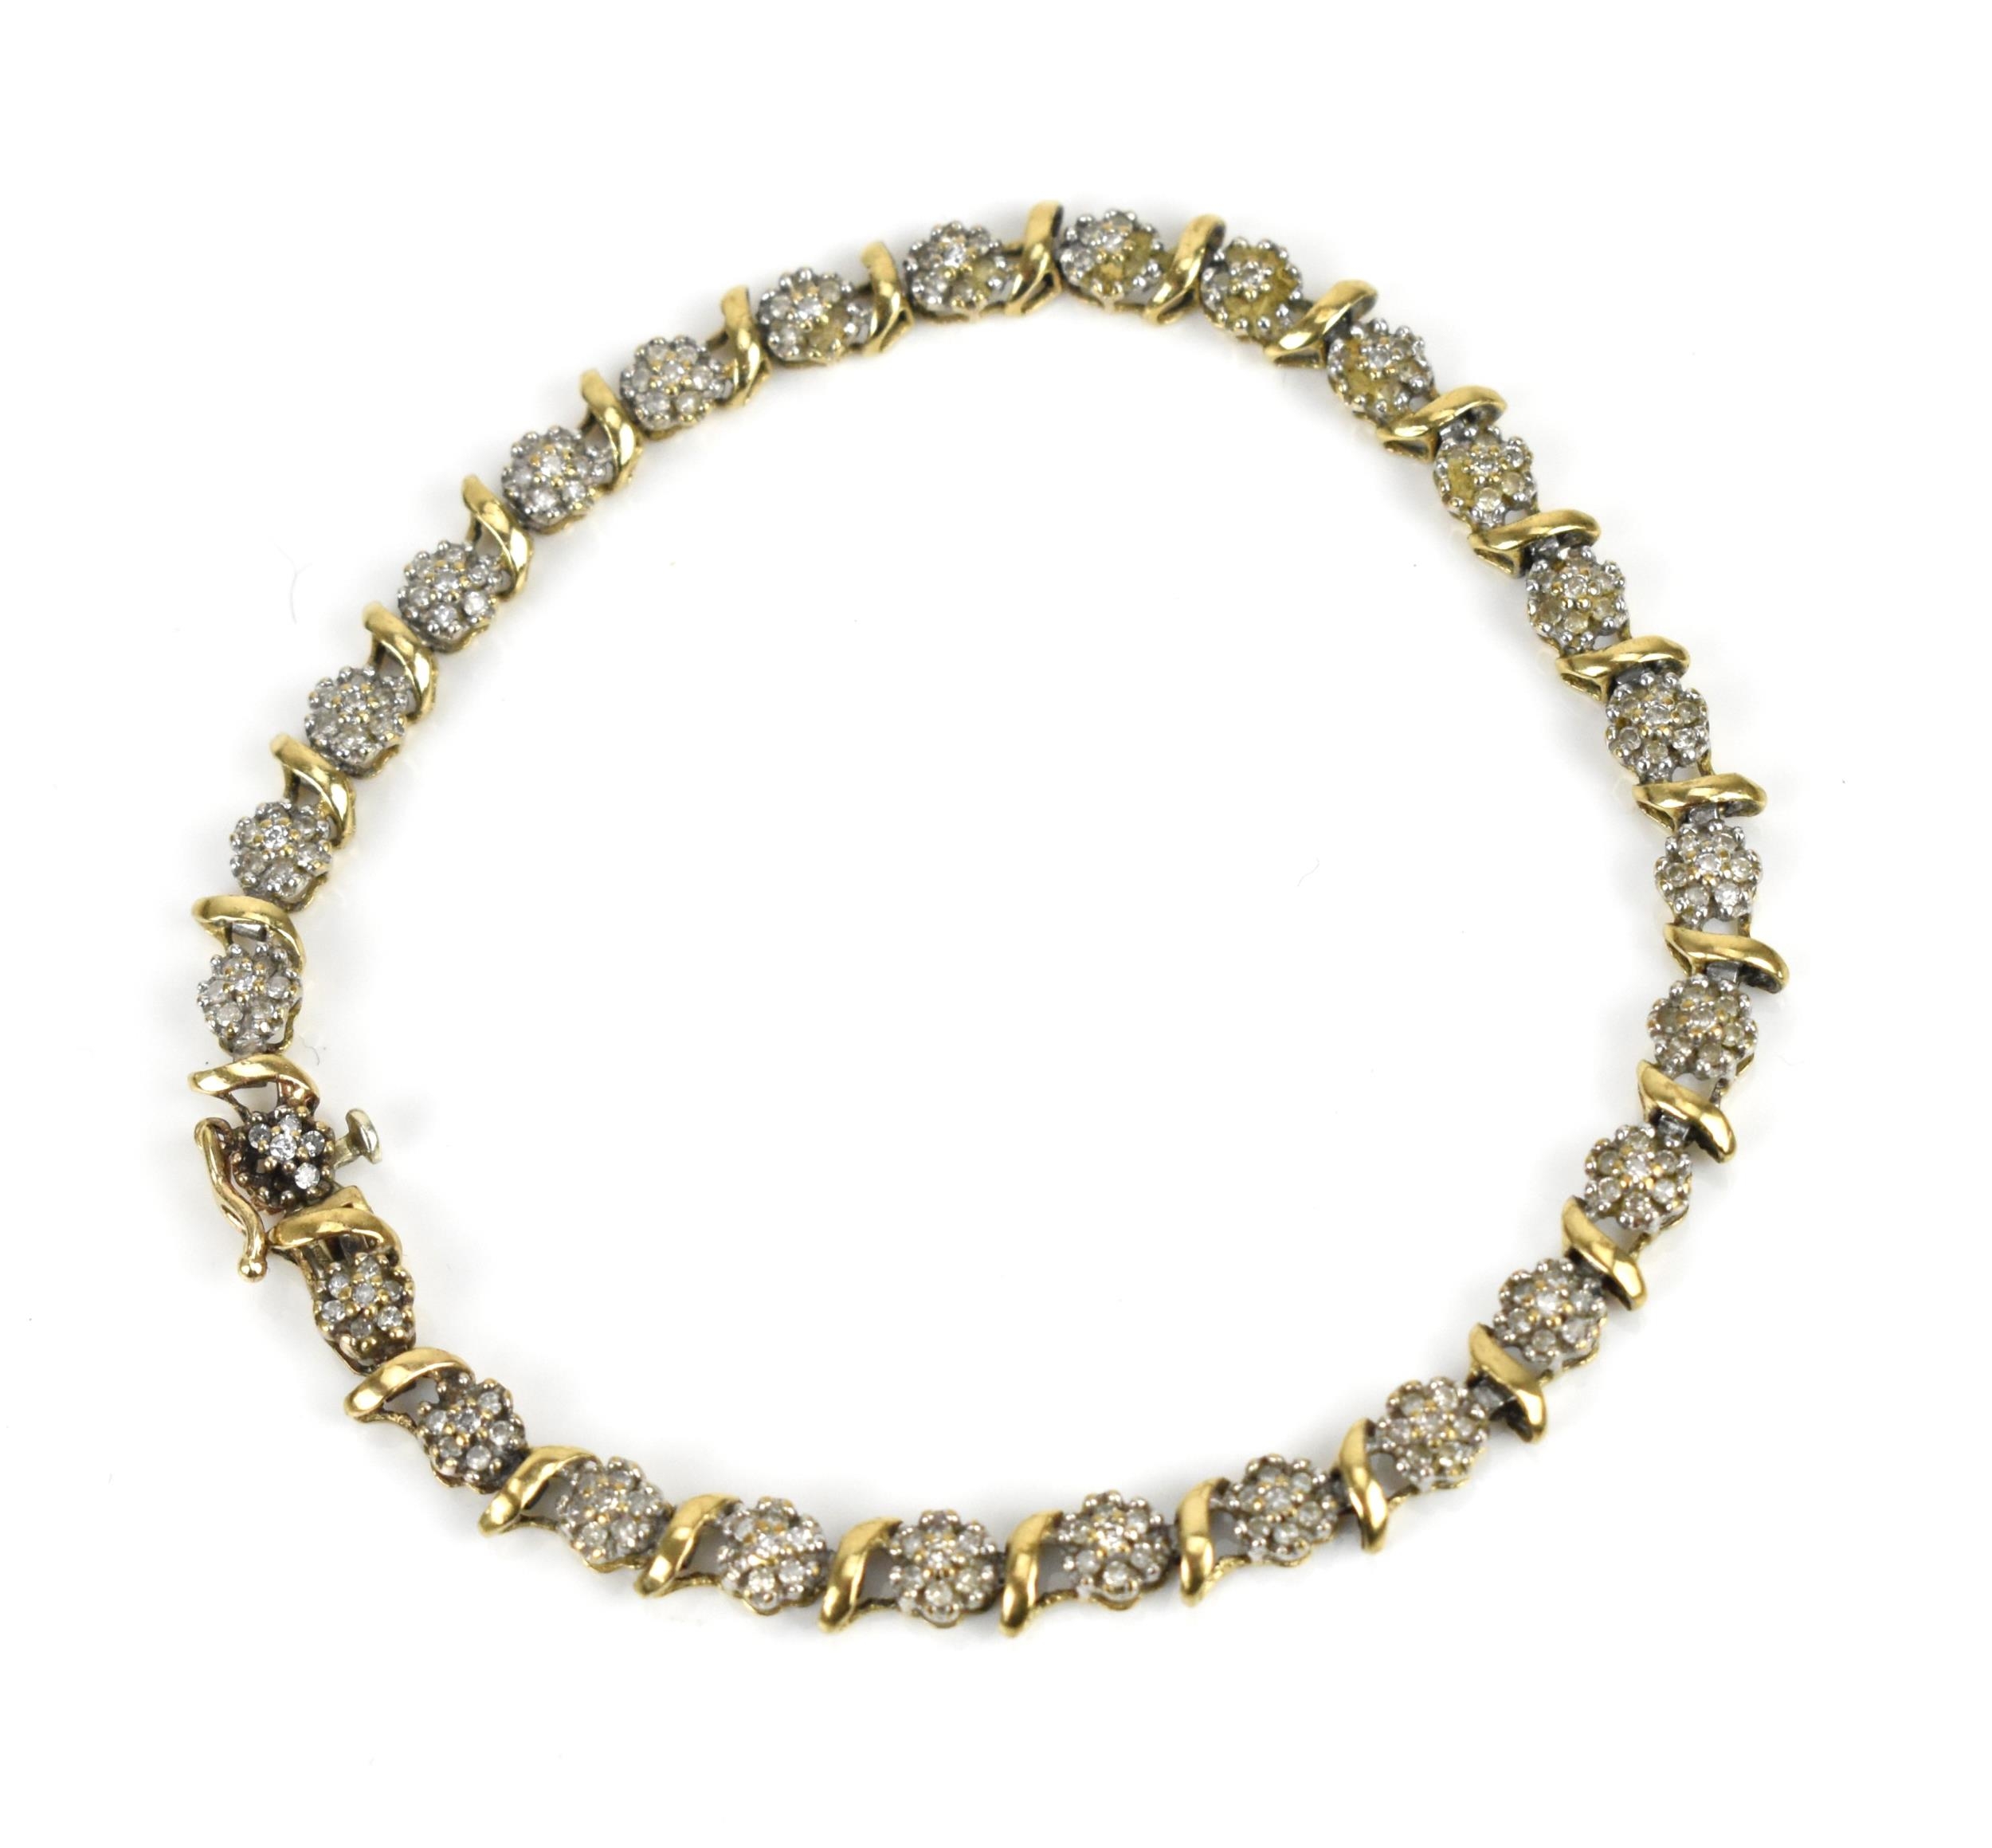 A 9ct yellow gold and diamond bracelet, designed with twenty-seven floral diamond clusters, with